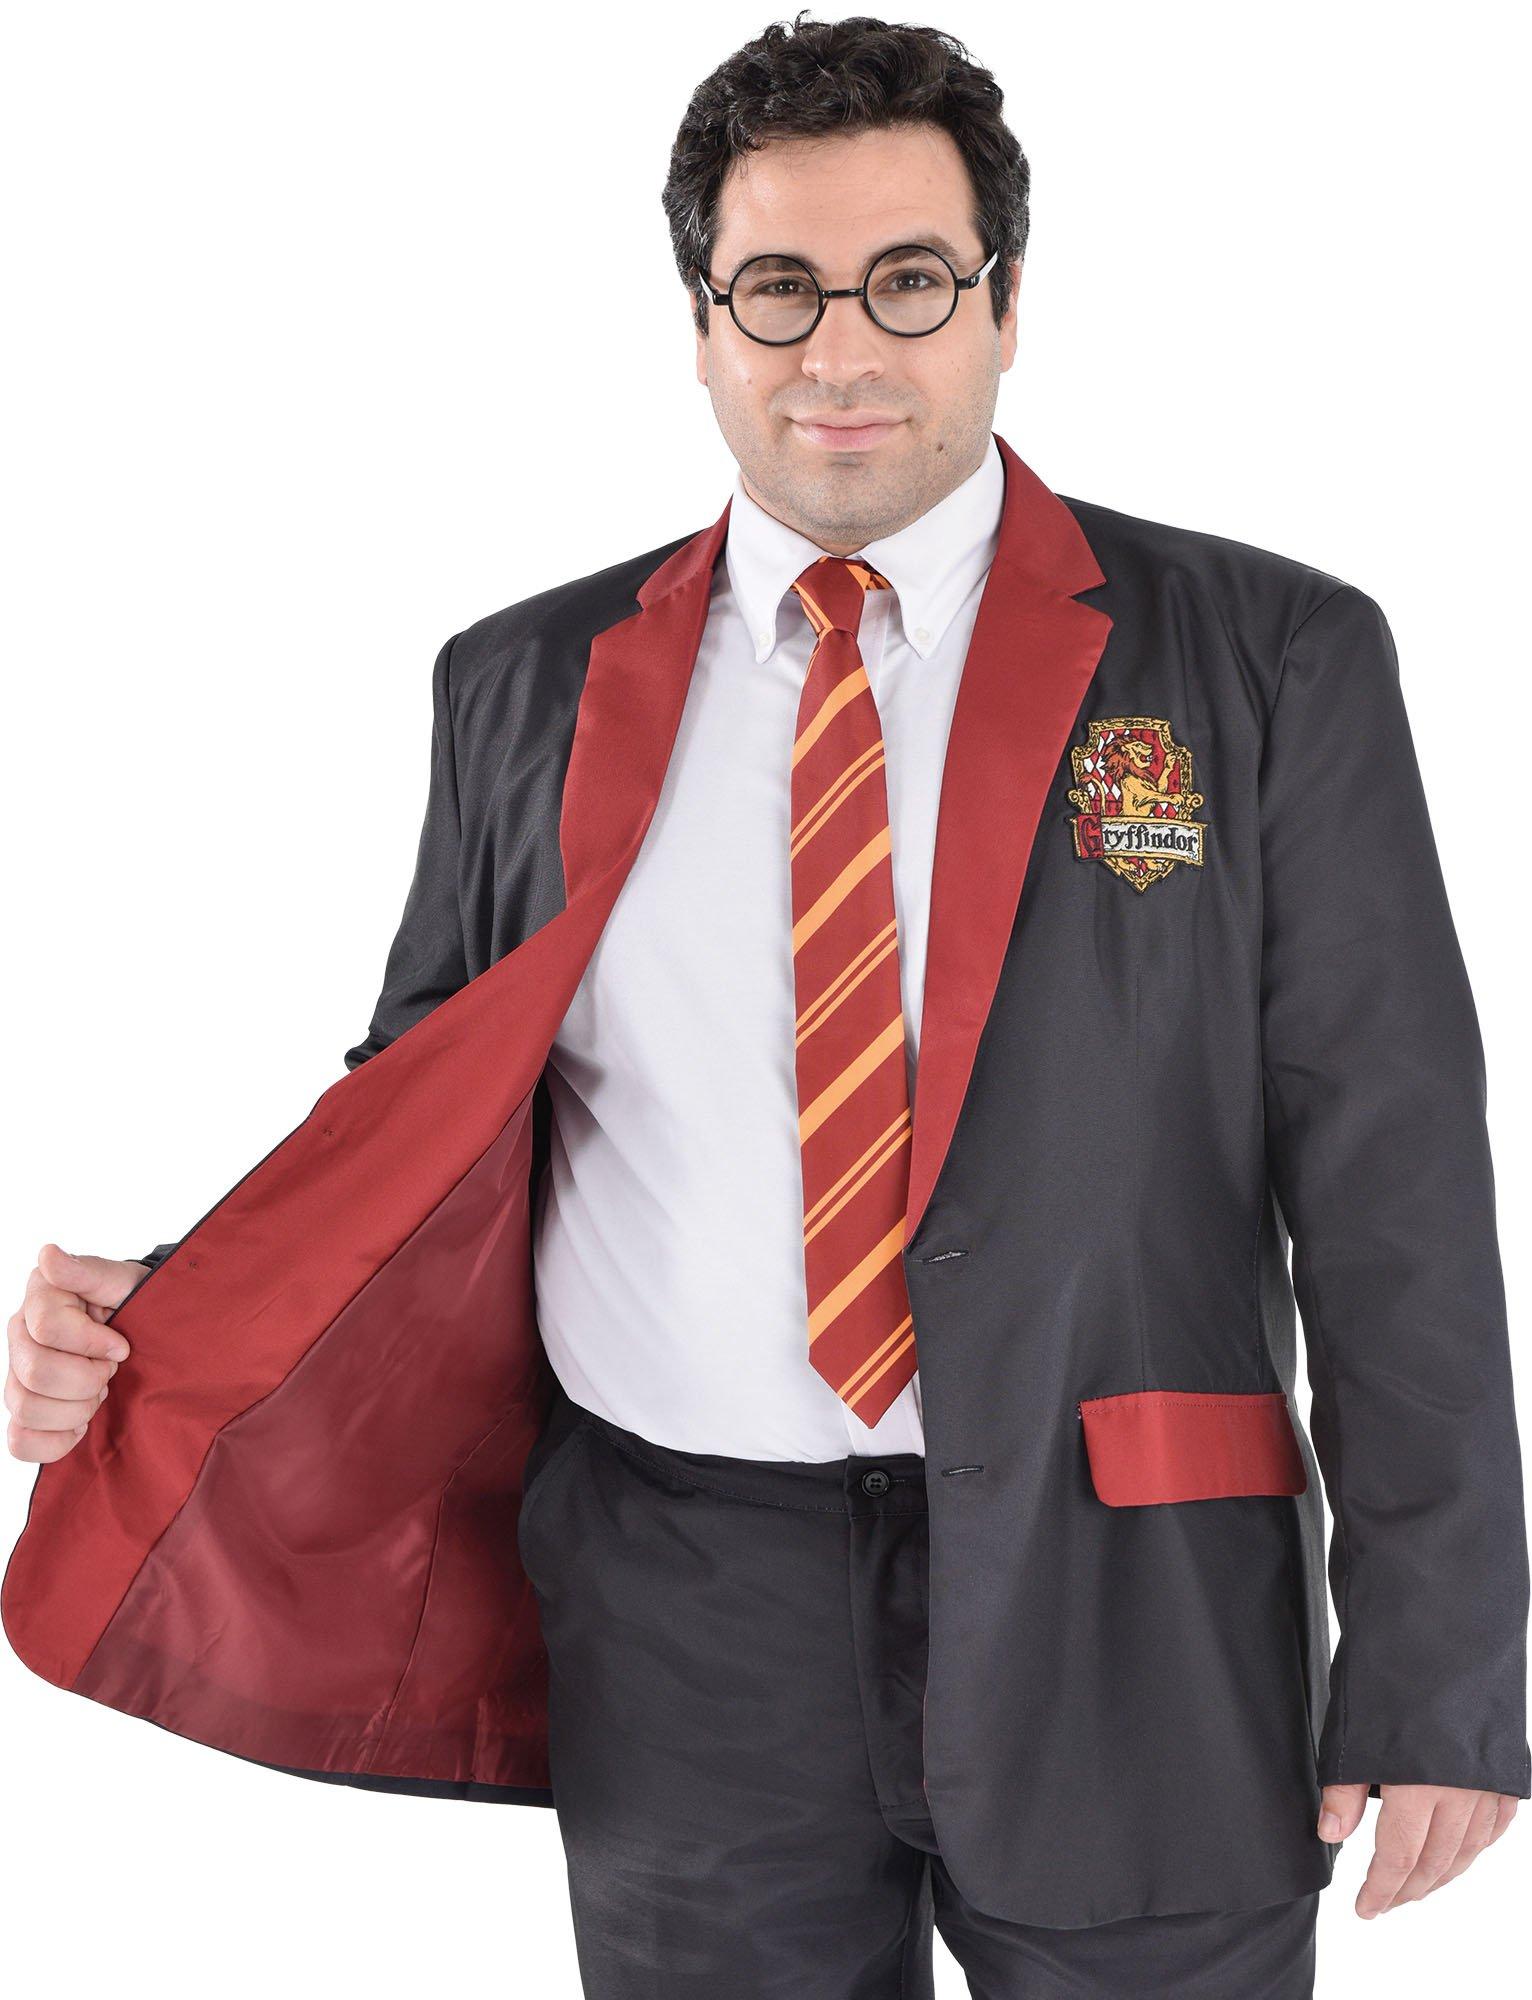 Set of 4 Harry Potter Ties, Gryffindor Clothing Accessories